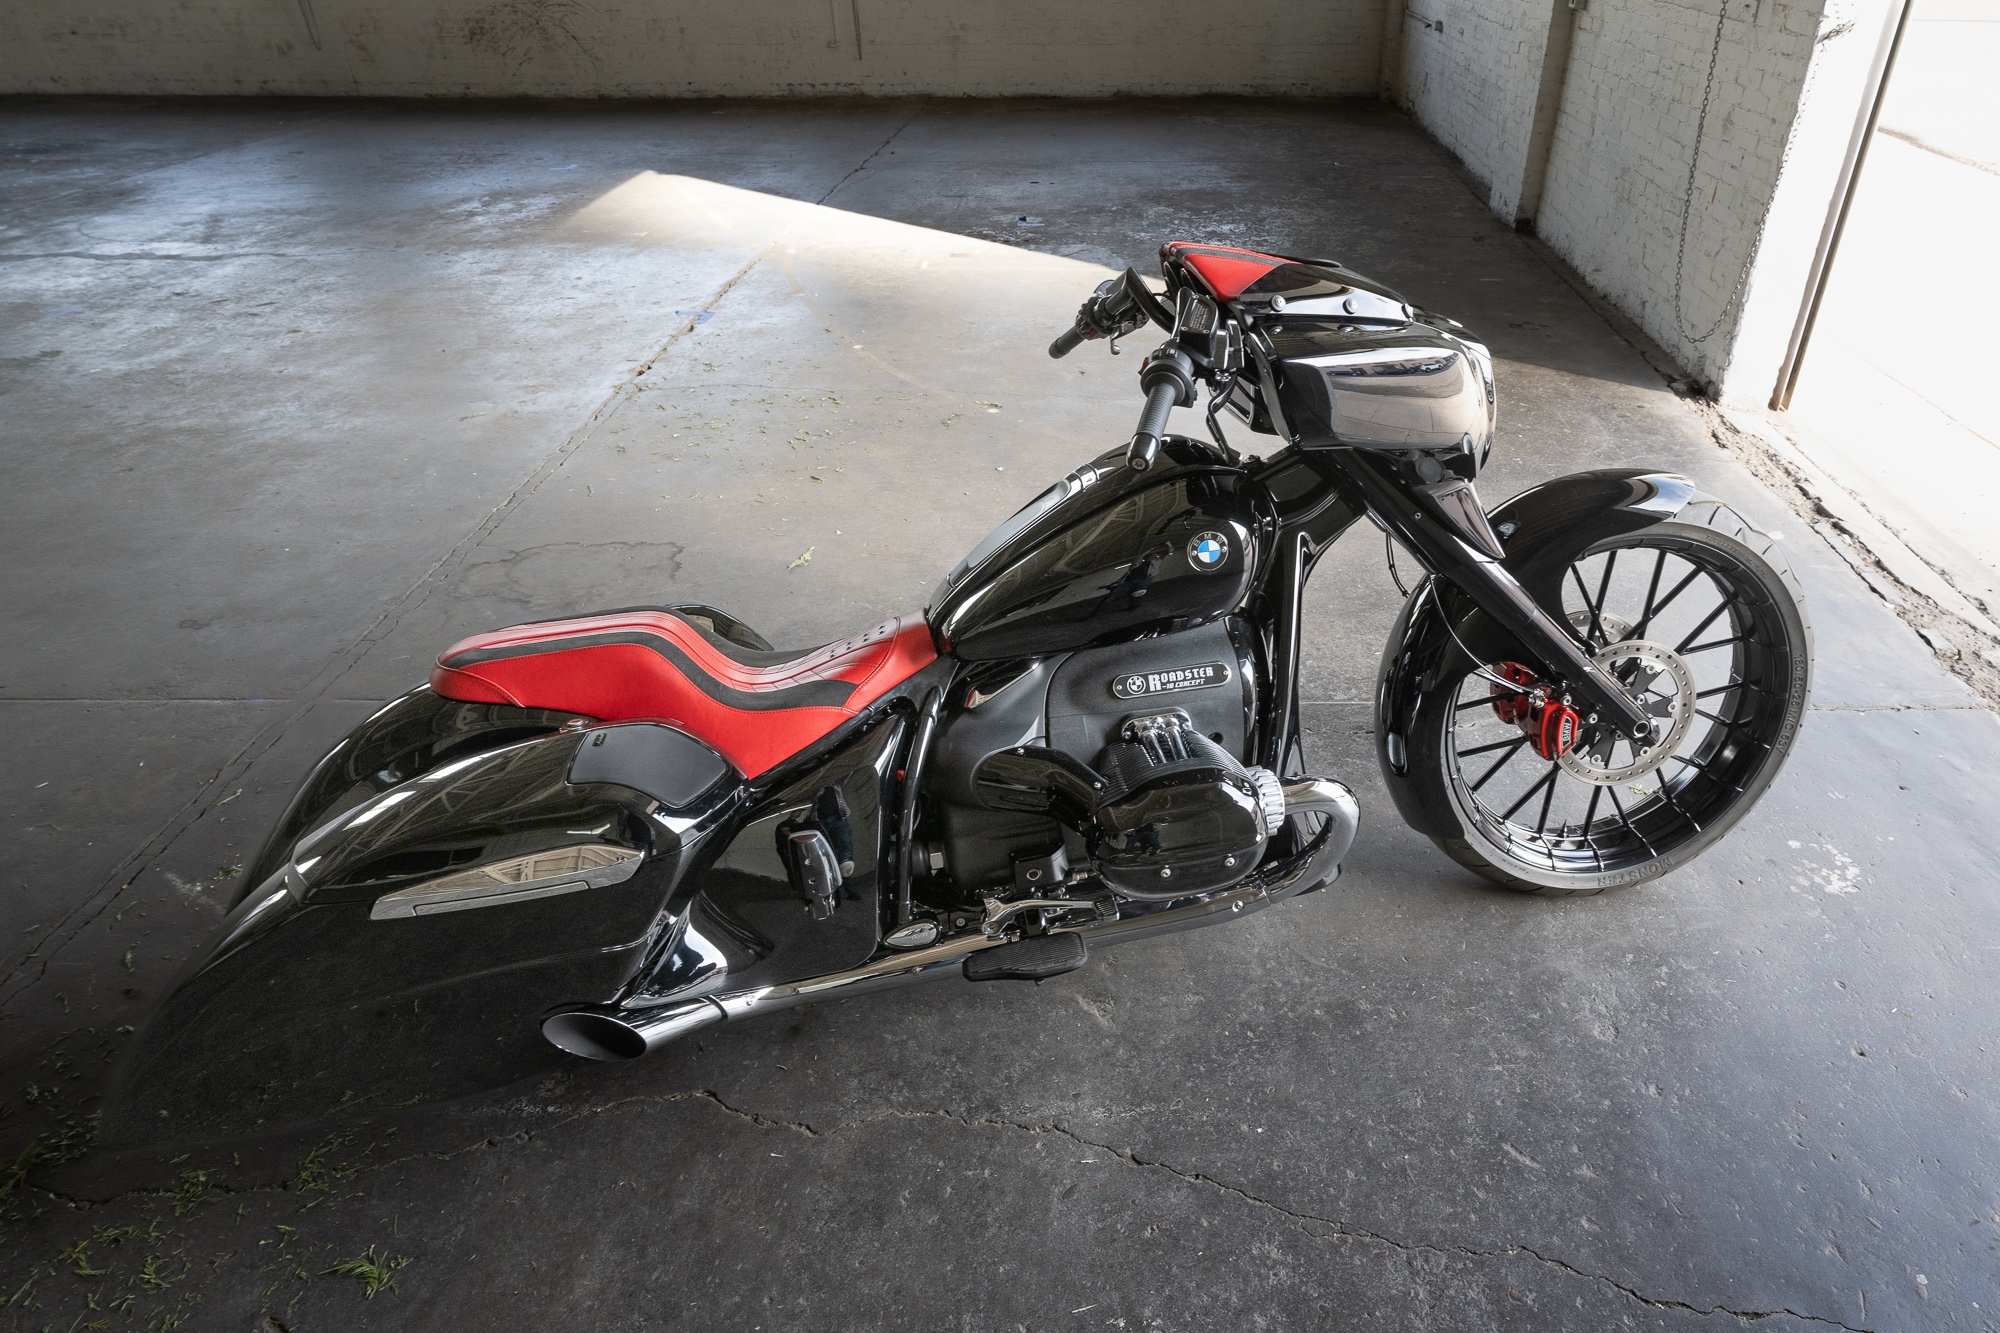 An aerial quarter view of a hot rod motorcycle.